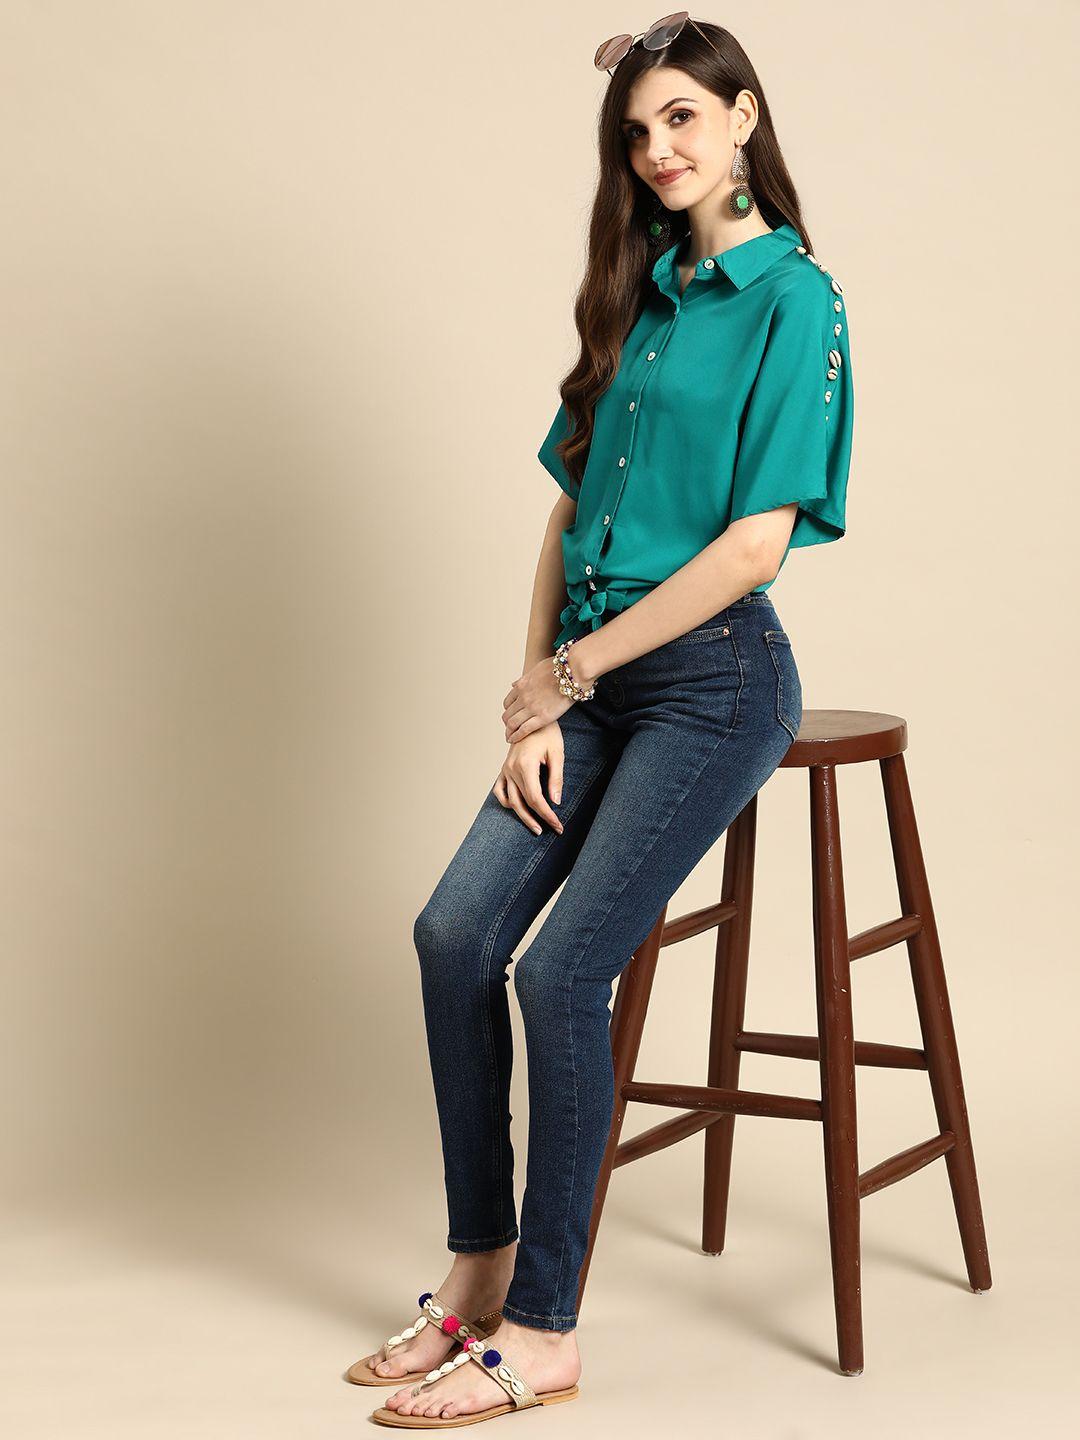 sangria women teal green shell detail extended sleeves shirt style top